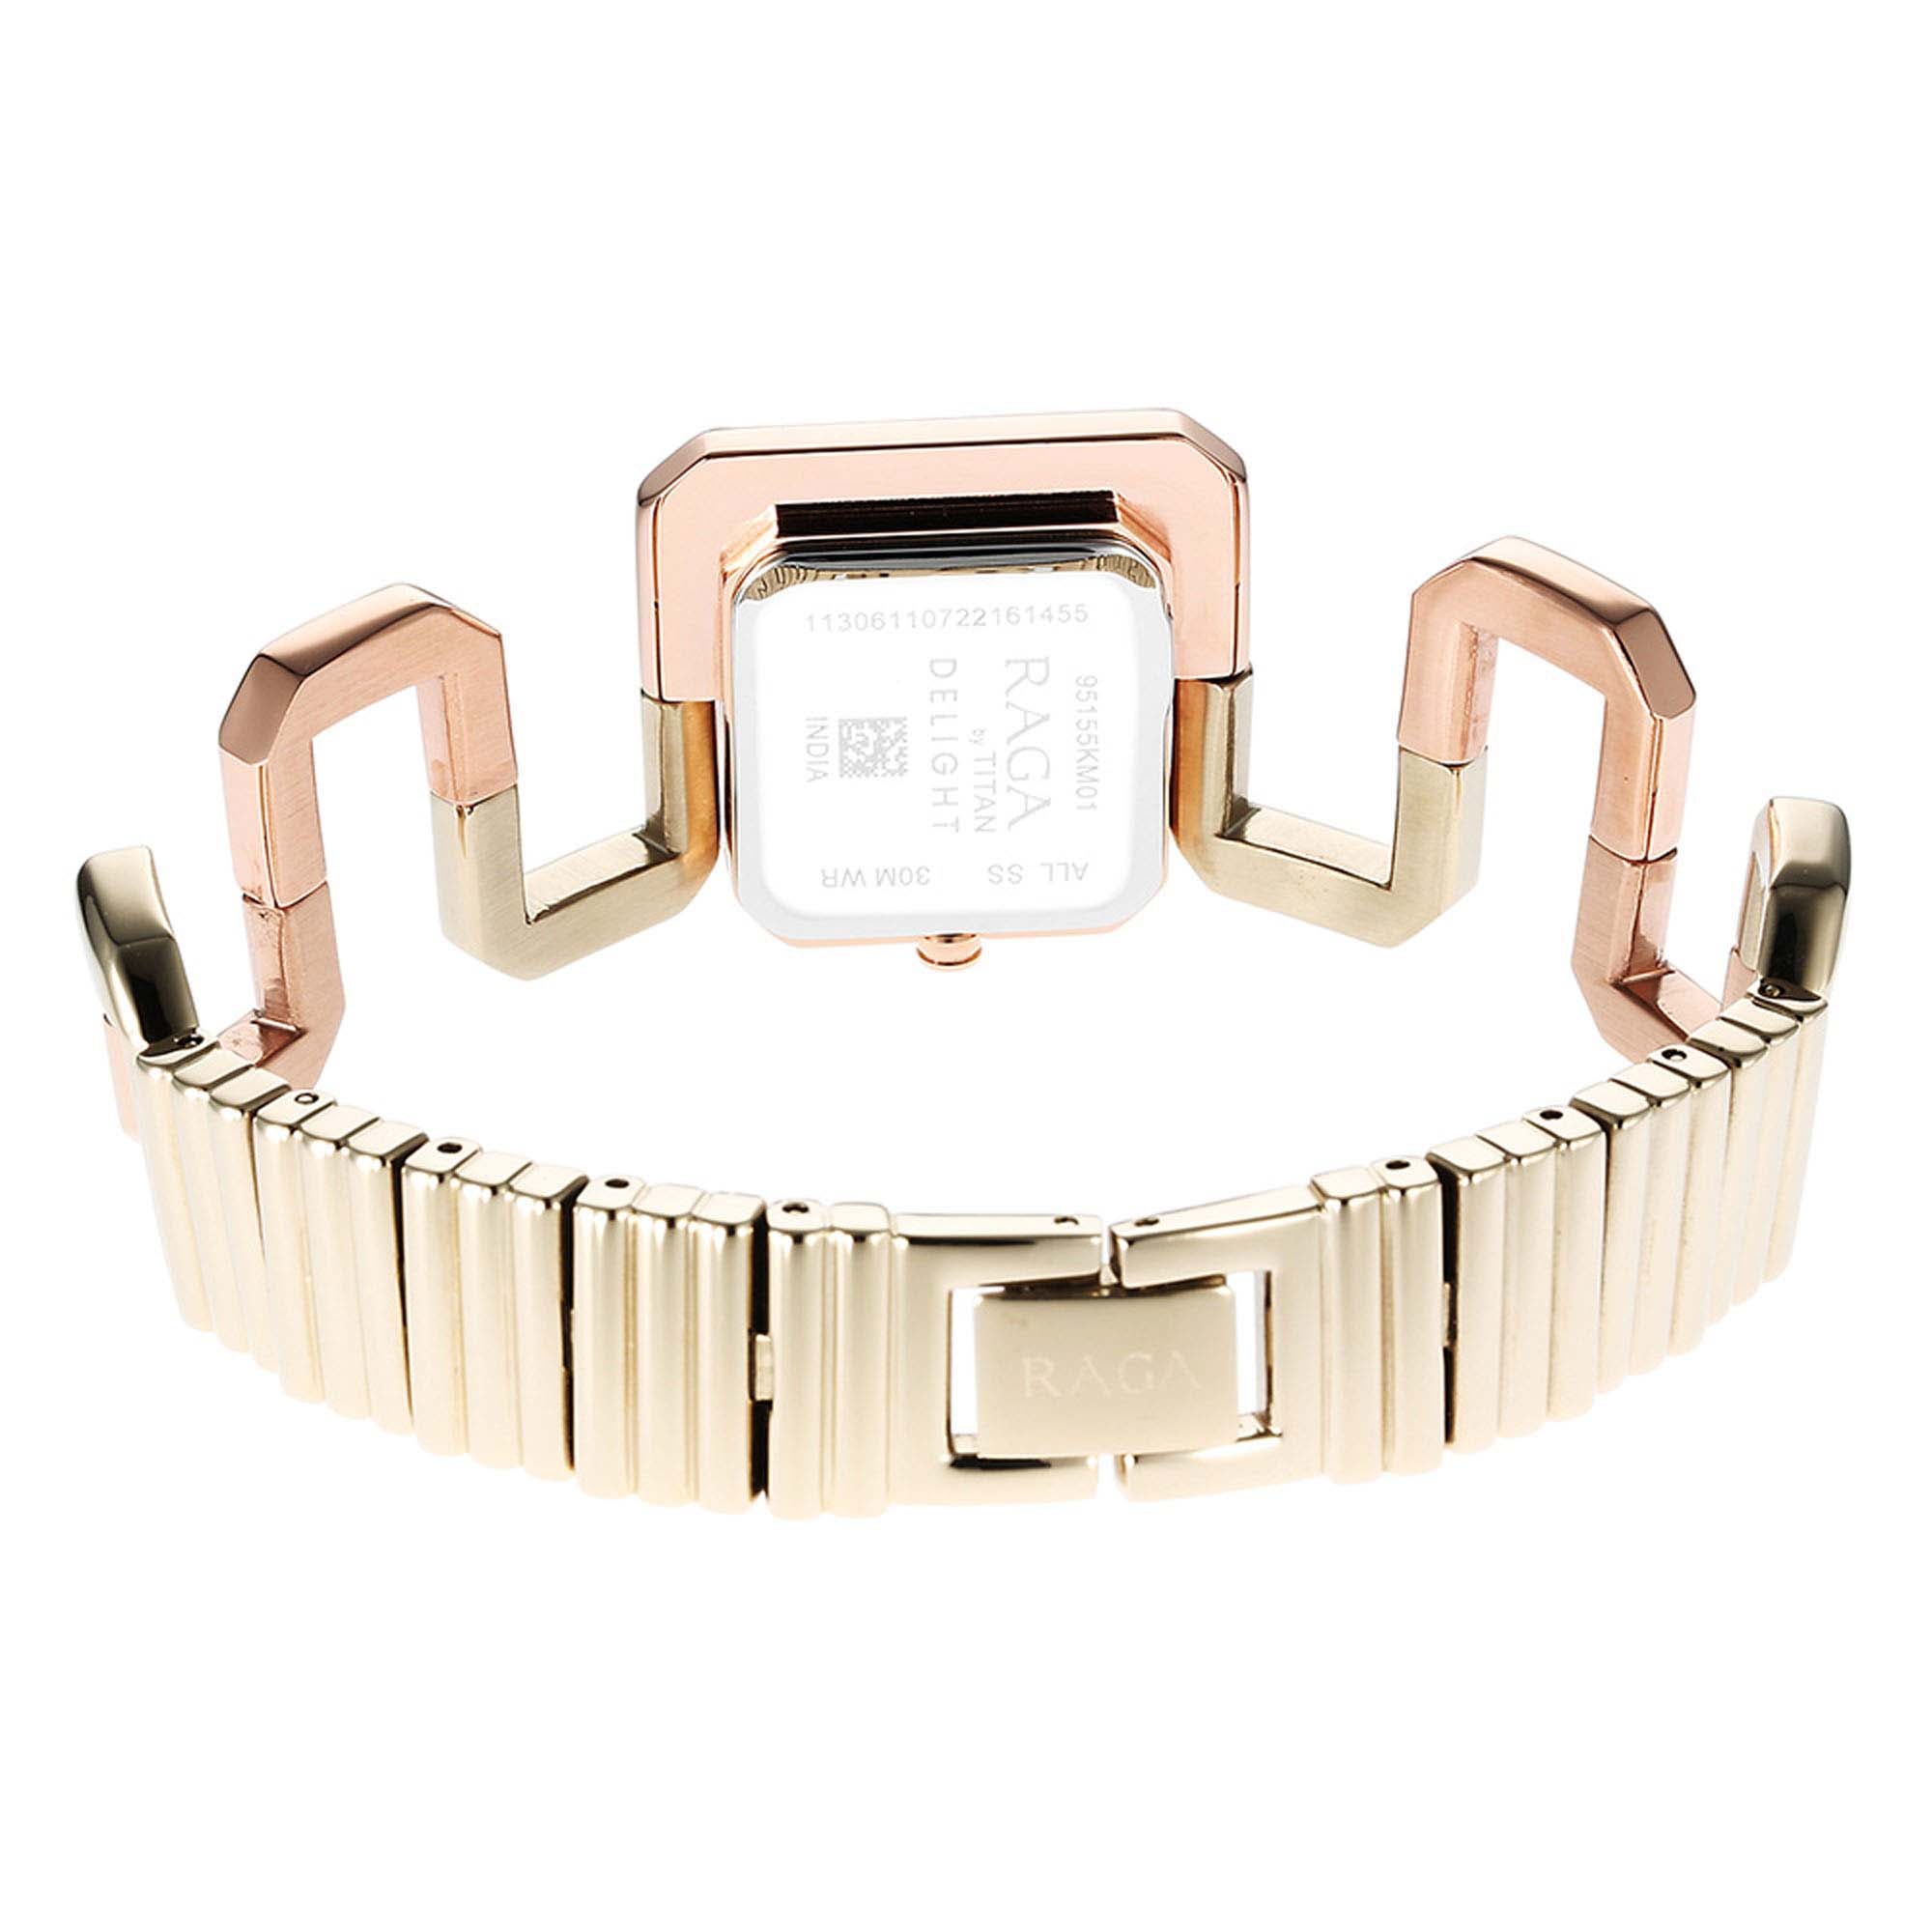 Titan Raga Delight Rose Gold Dial Women Watch With Stainless Steel Strap